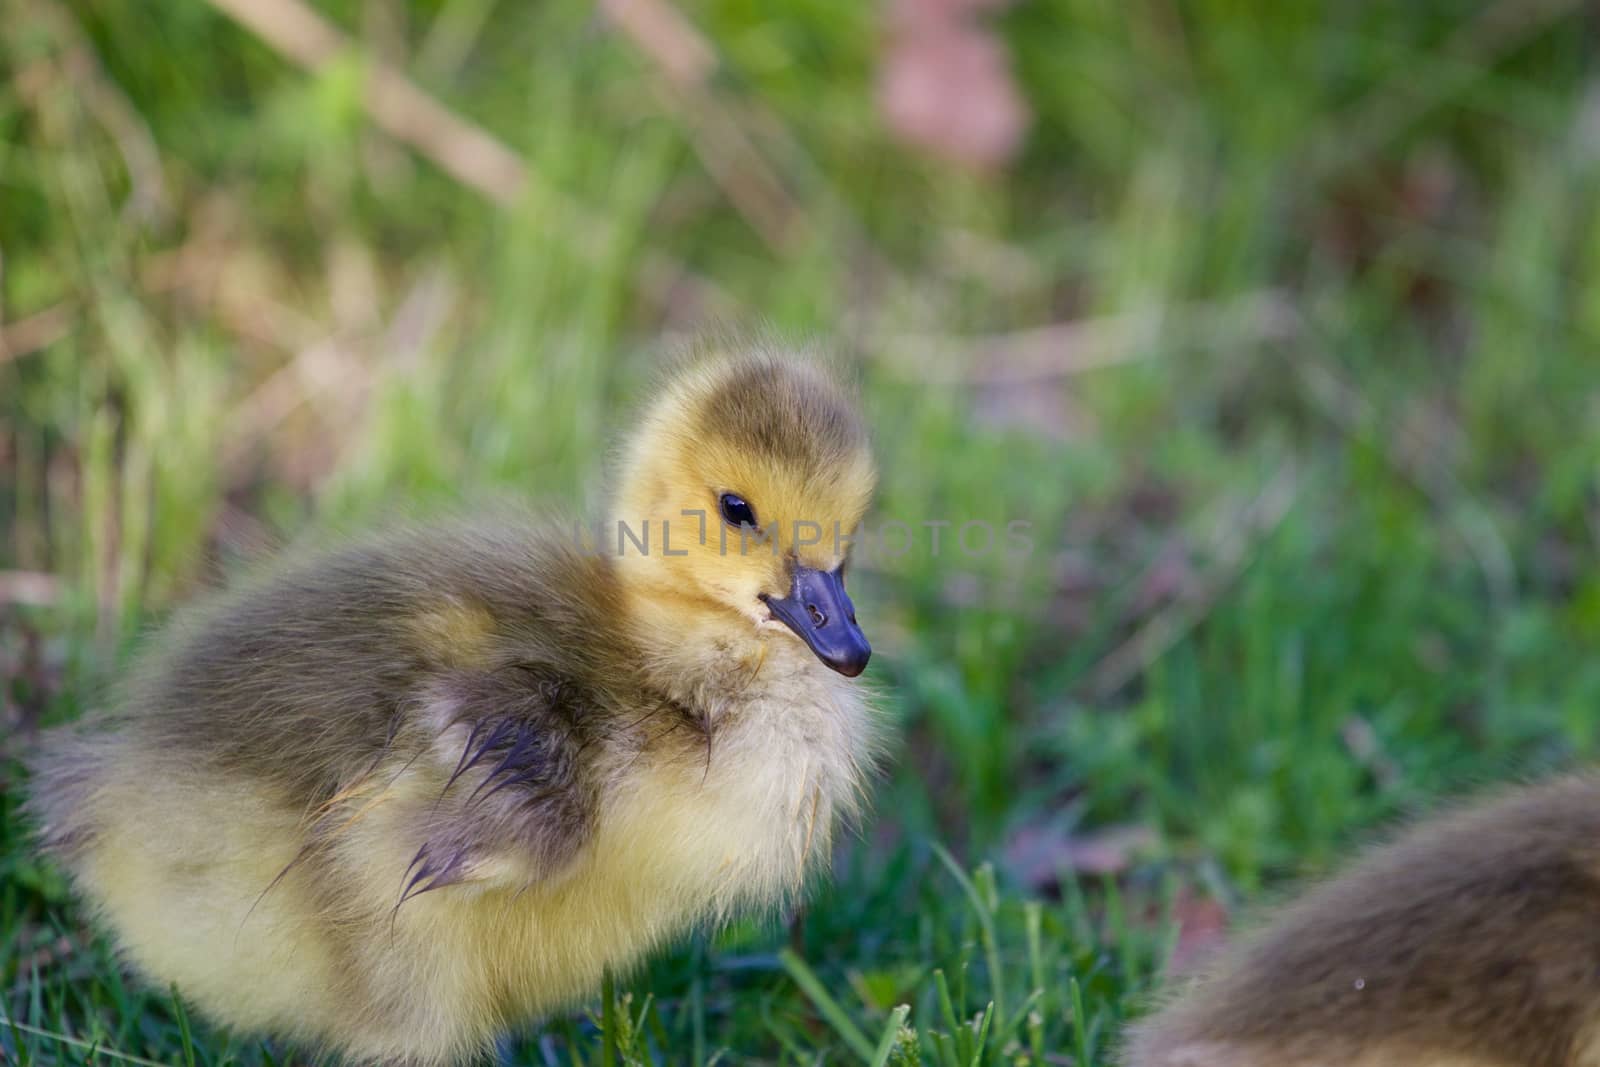 Cute chick close-up by teo